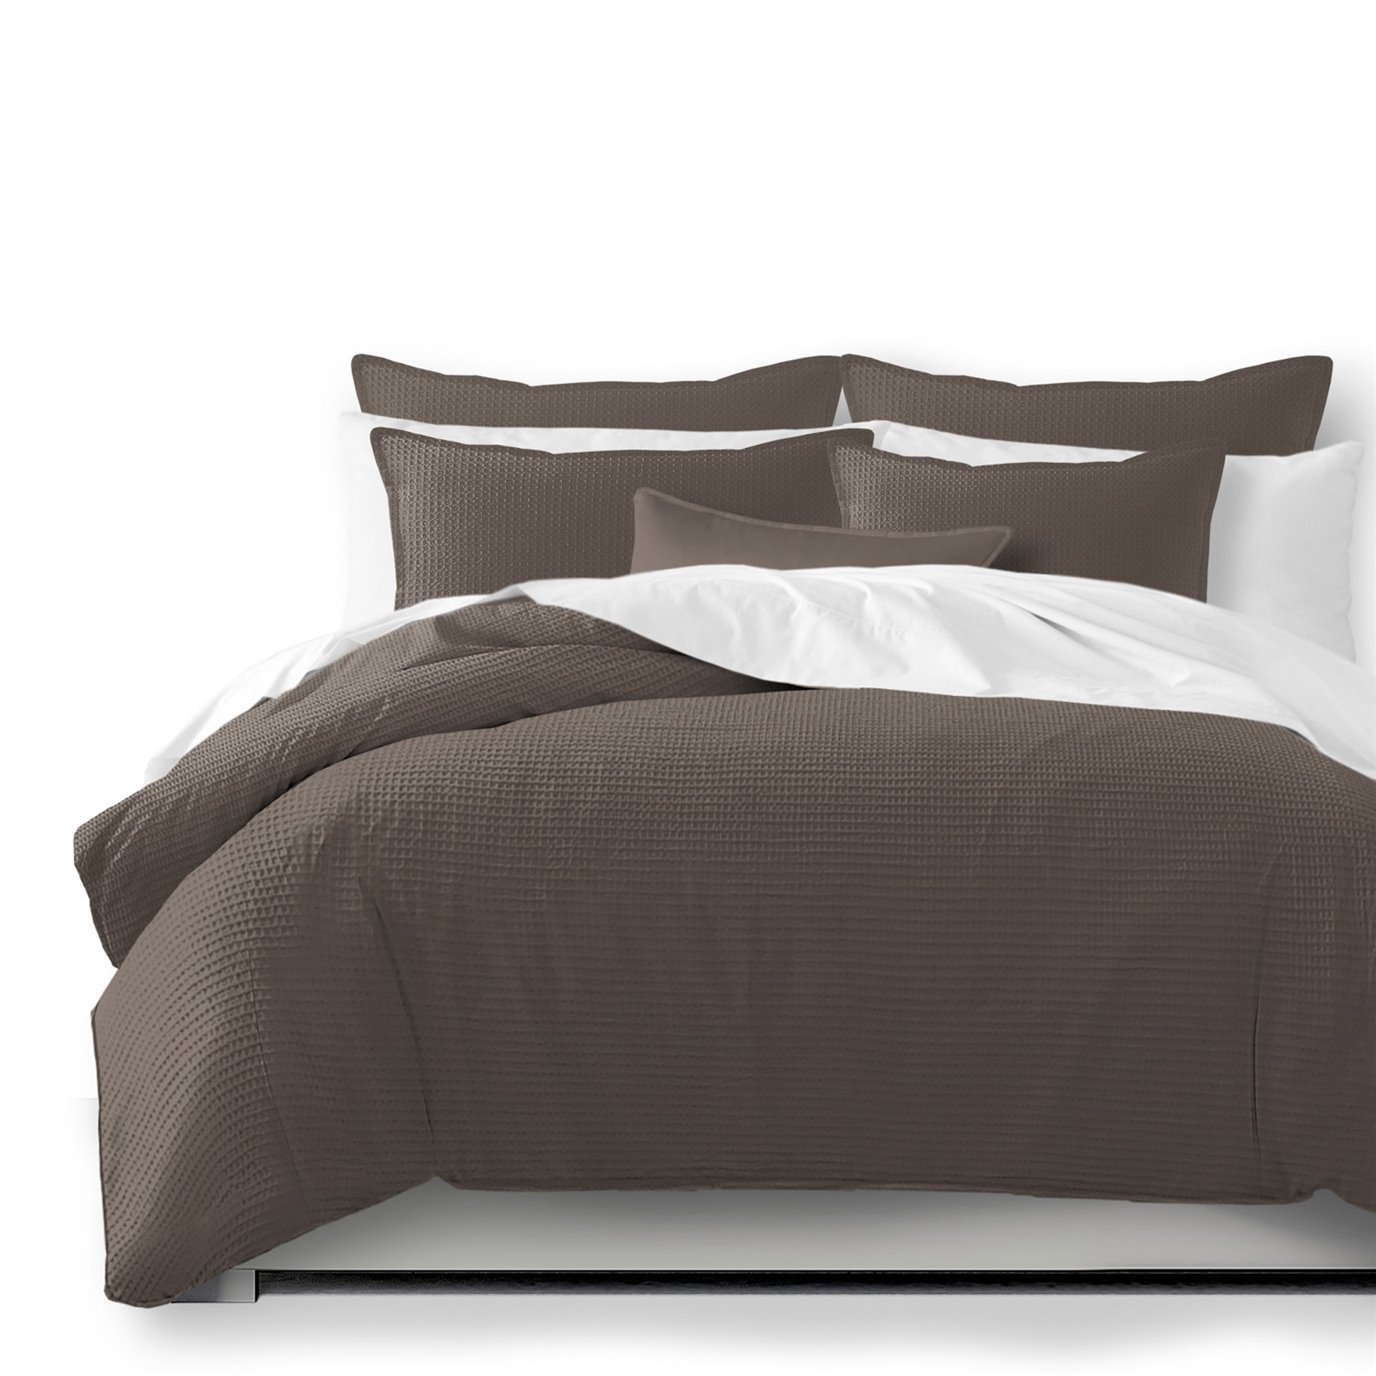 Classic Waffle Mocca Comforter and Pillow Sham(s) Set - Size Twin